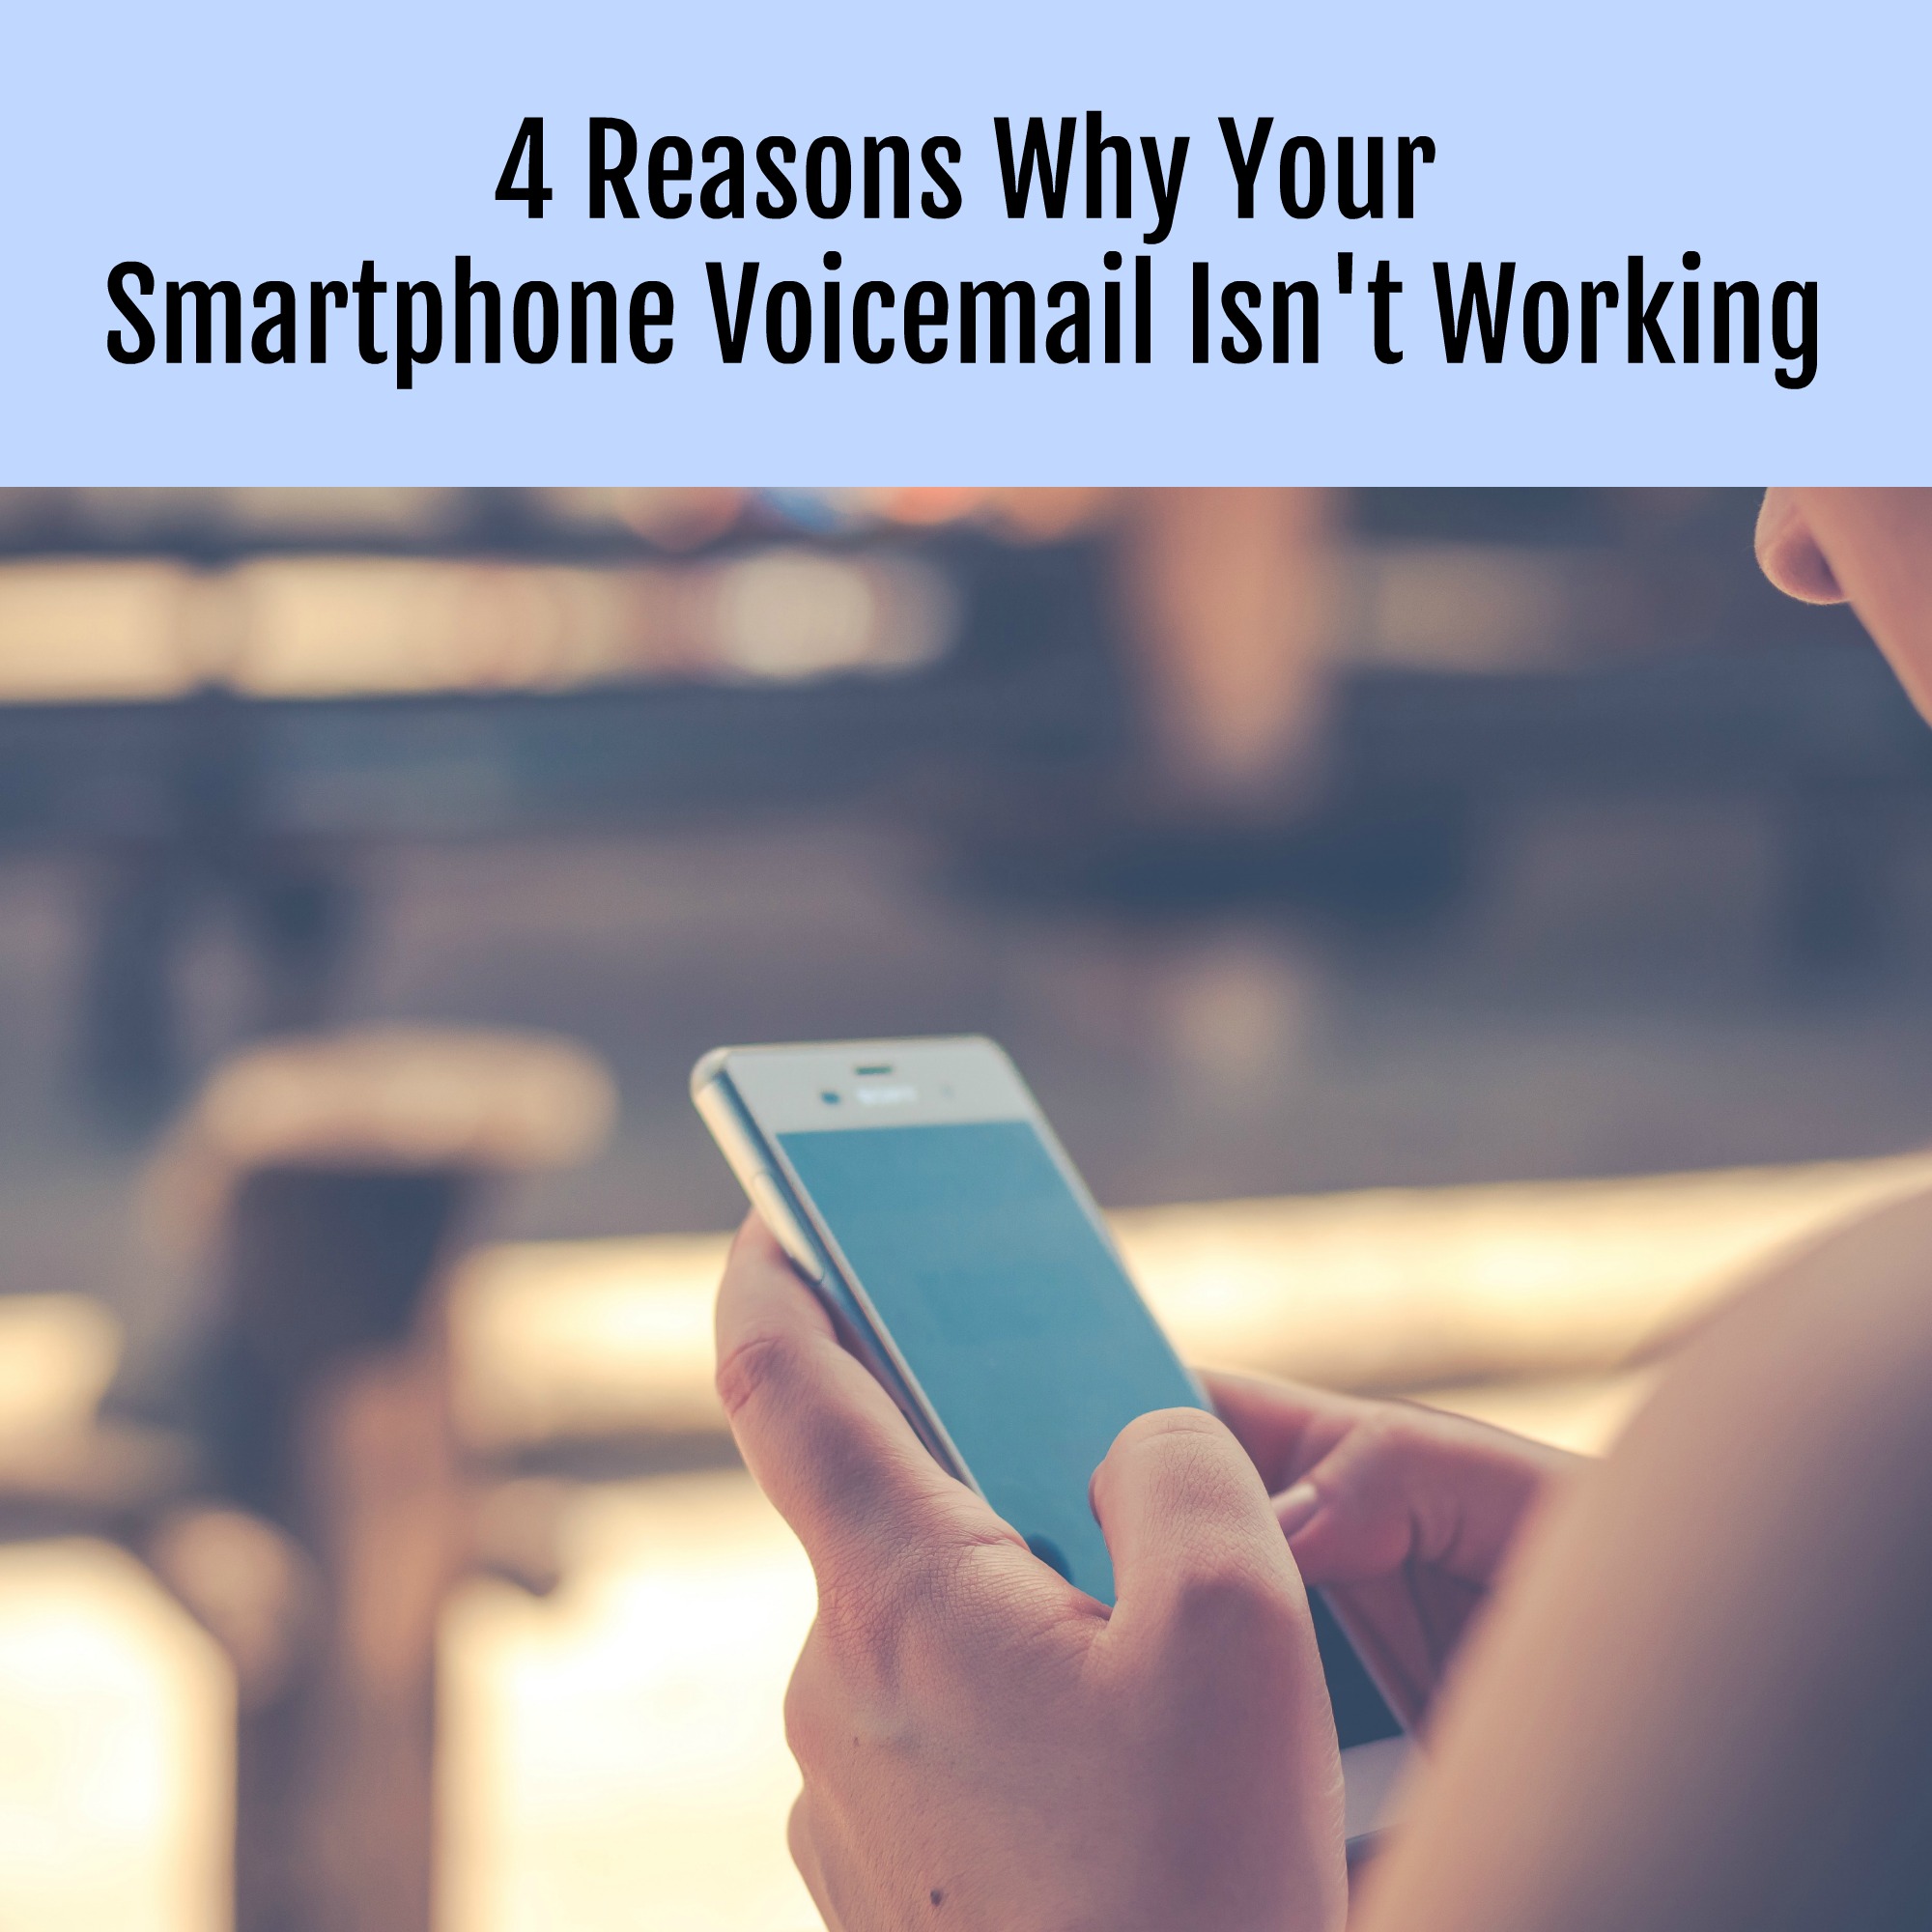 4 Reasons Why Your Smartphone Voicemail Isn't Working